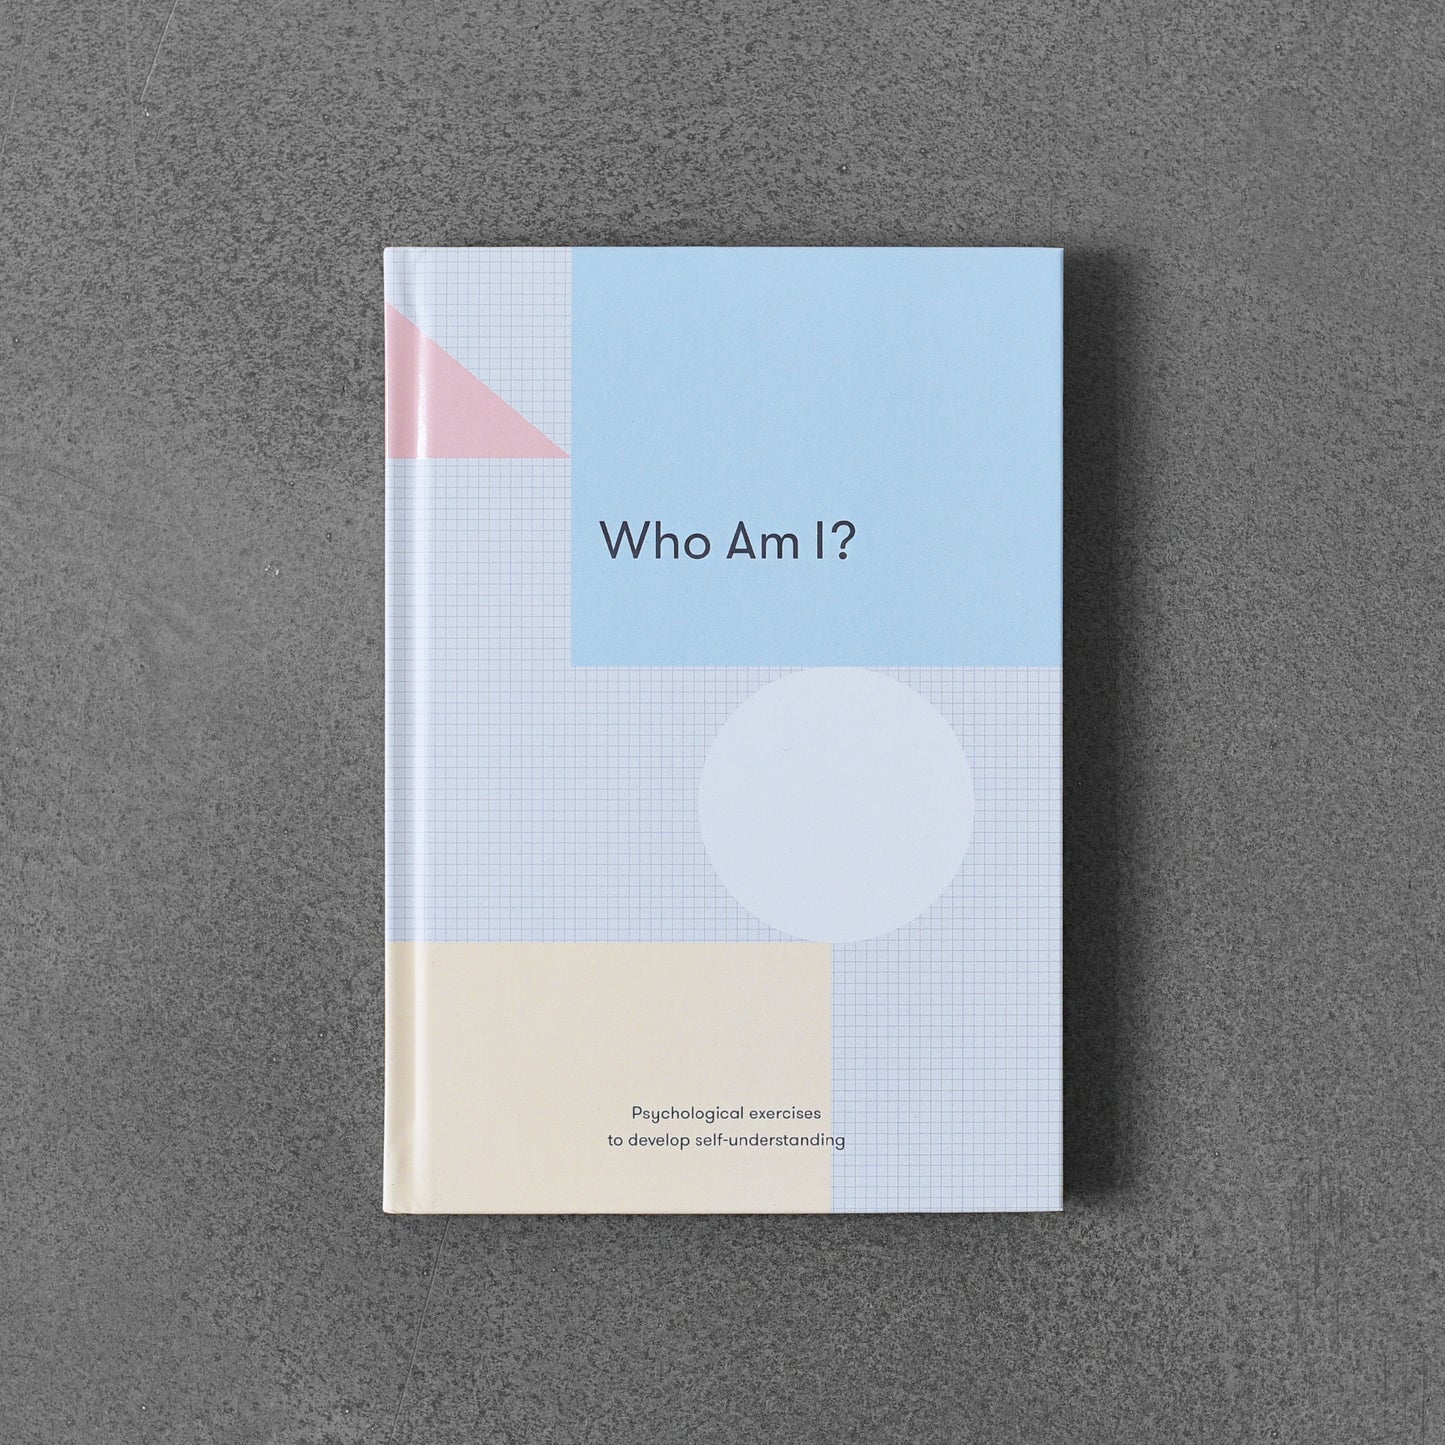 Who Am I? Psychological Exercises to Develop Self-Understanding